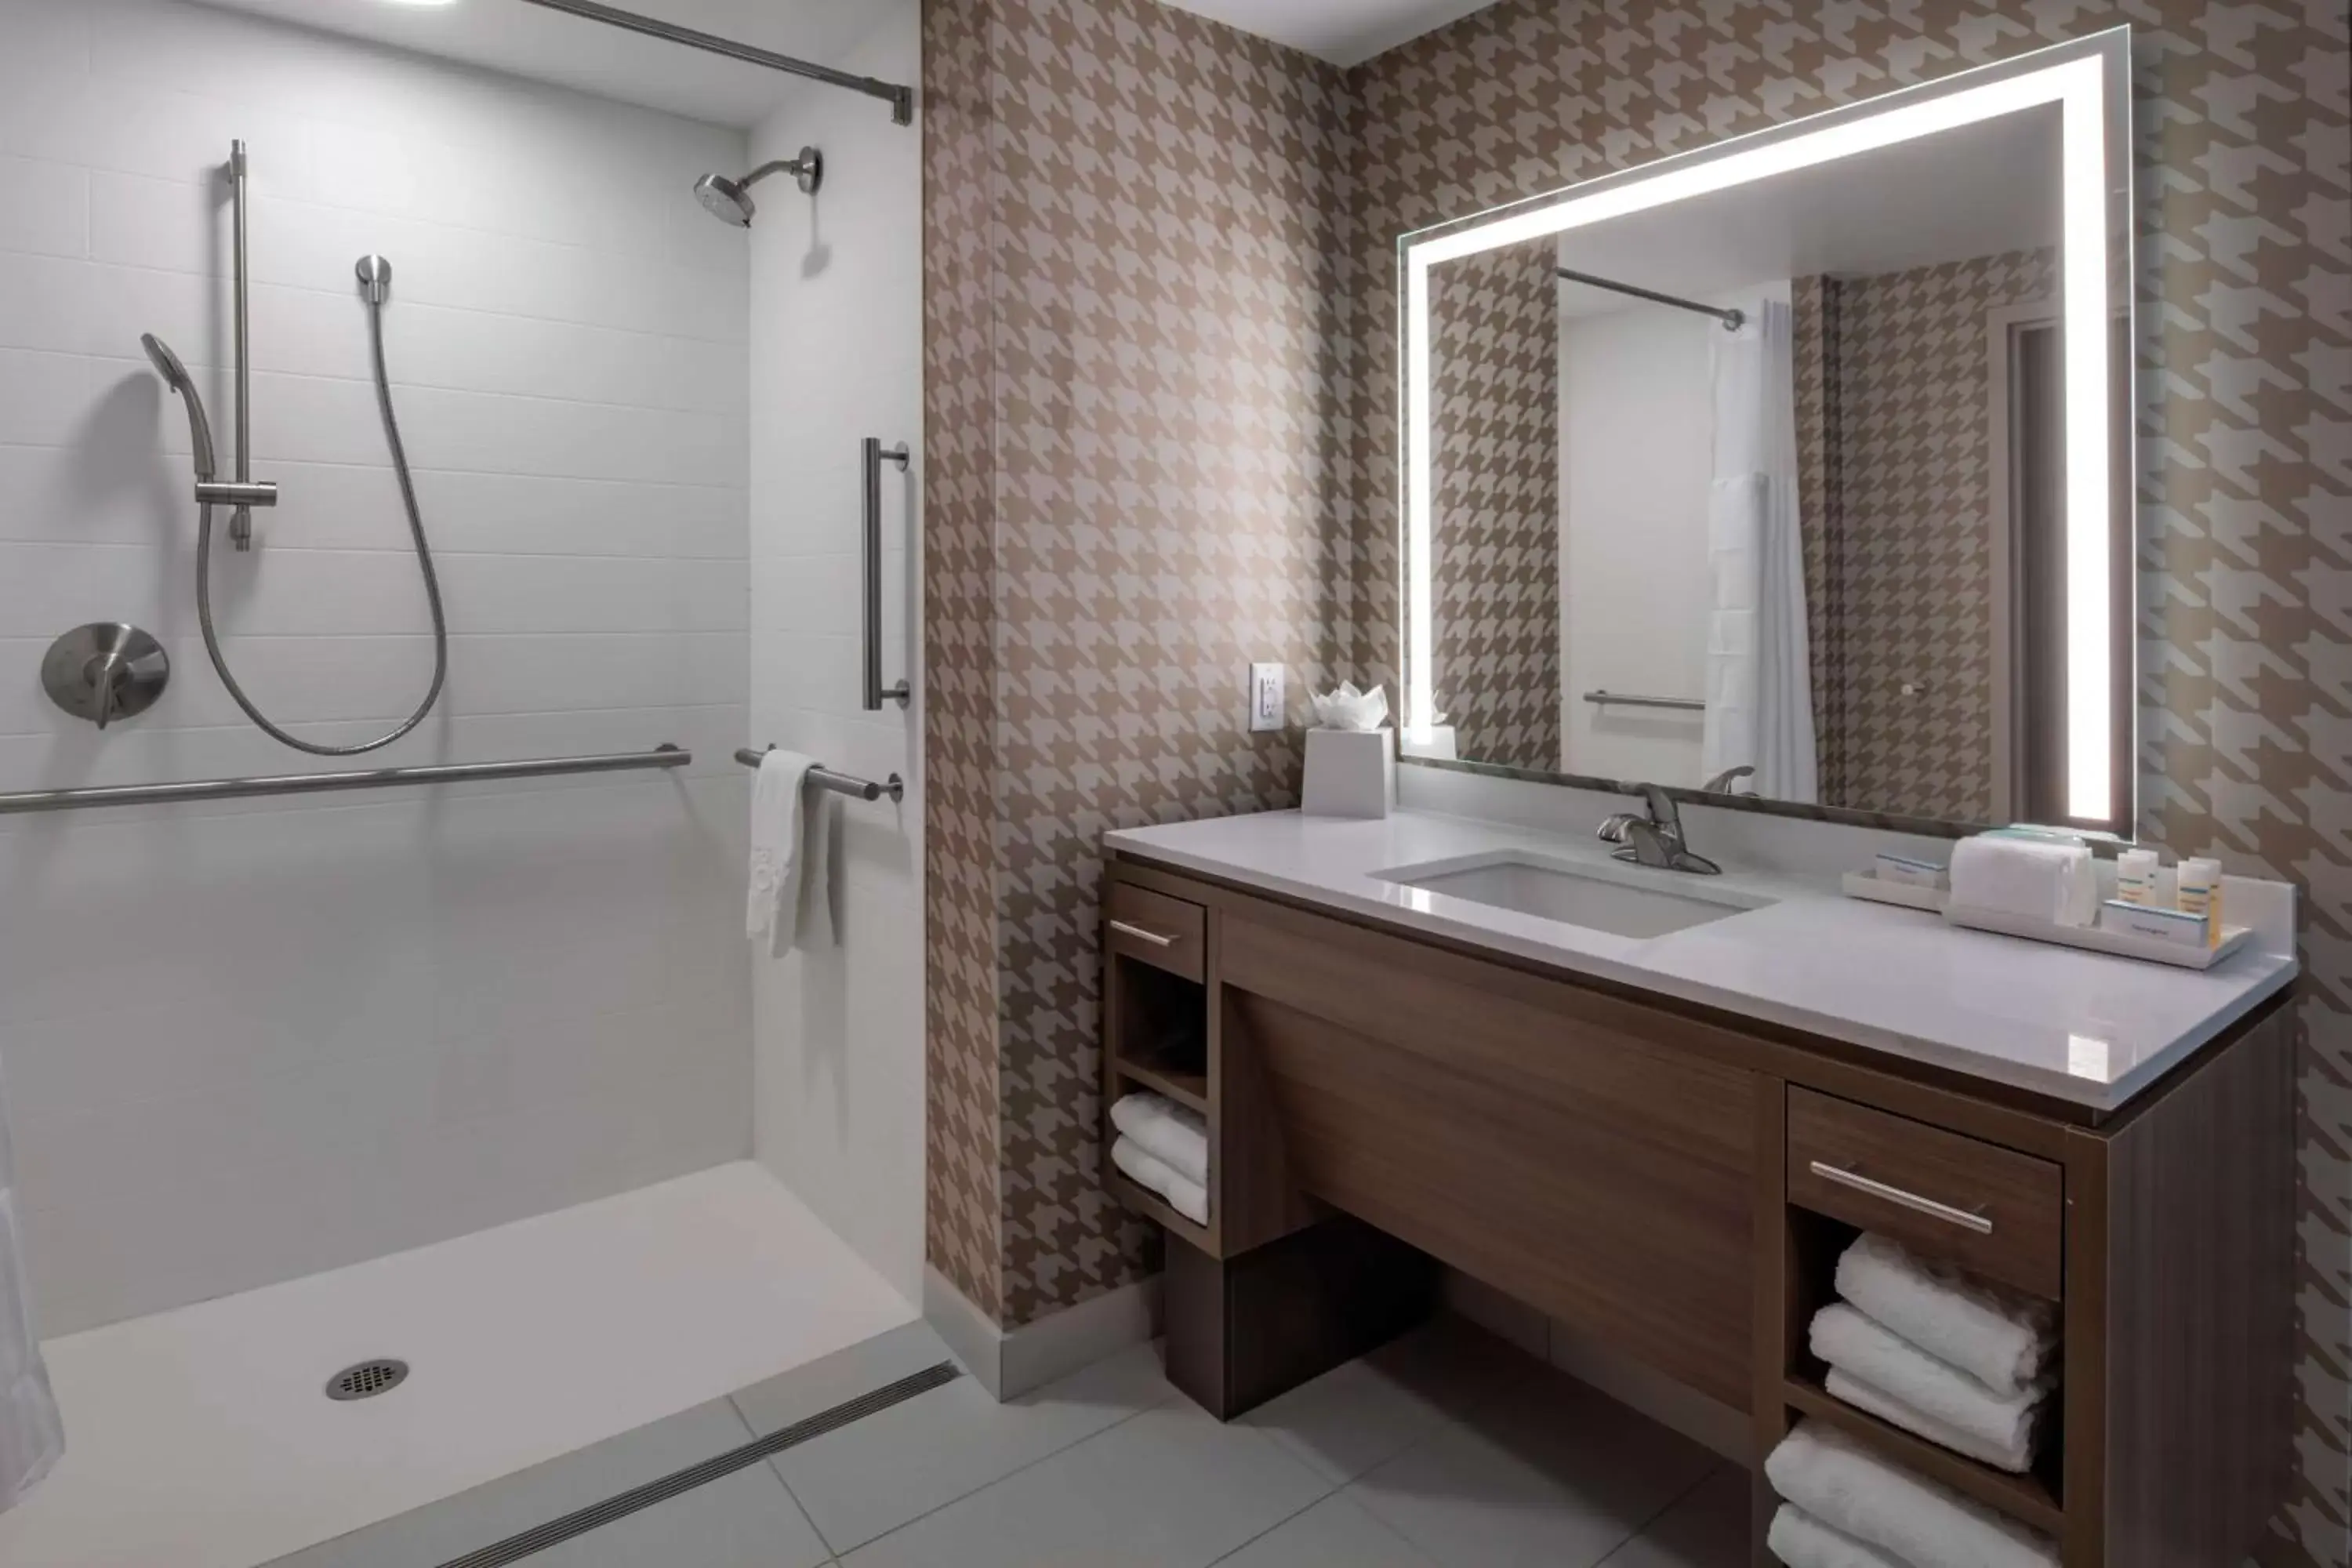 Bathroom in Home2 Suites by Hilton Omaha I-80 at 72nd Street, NE